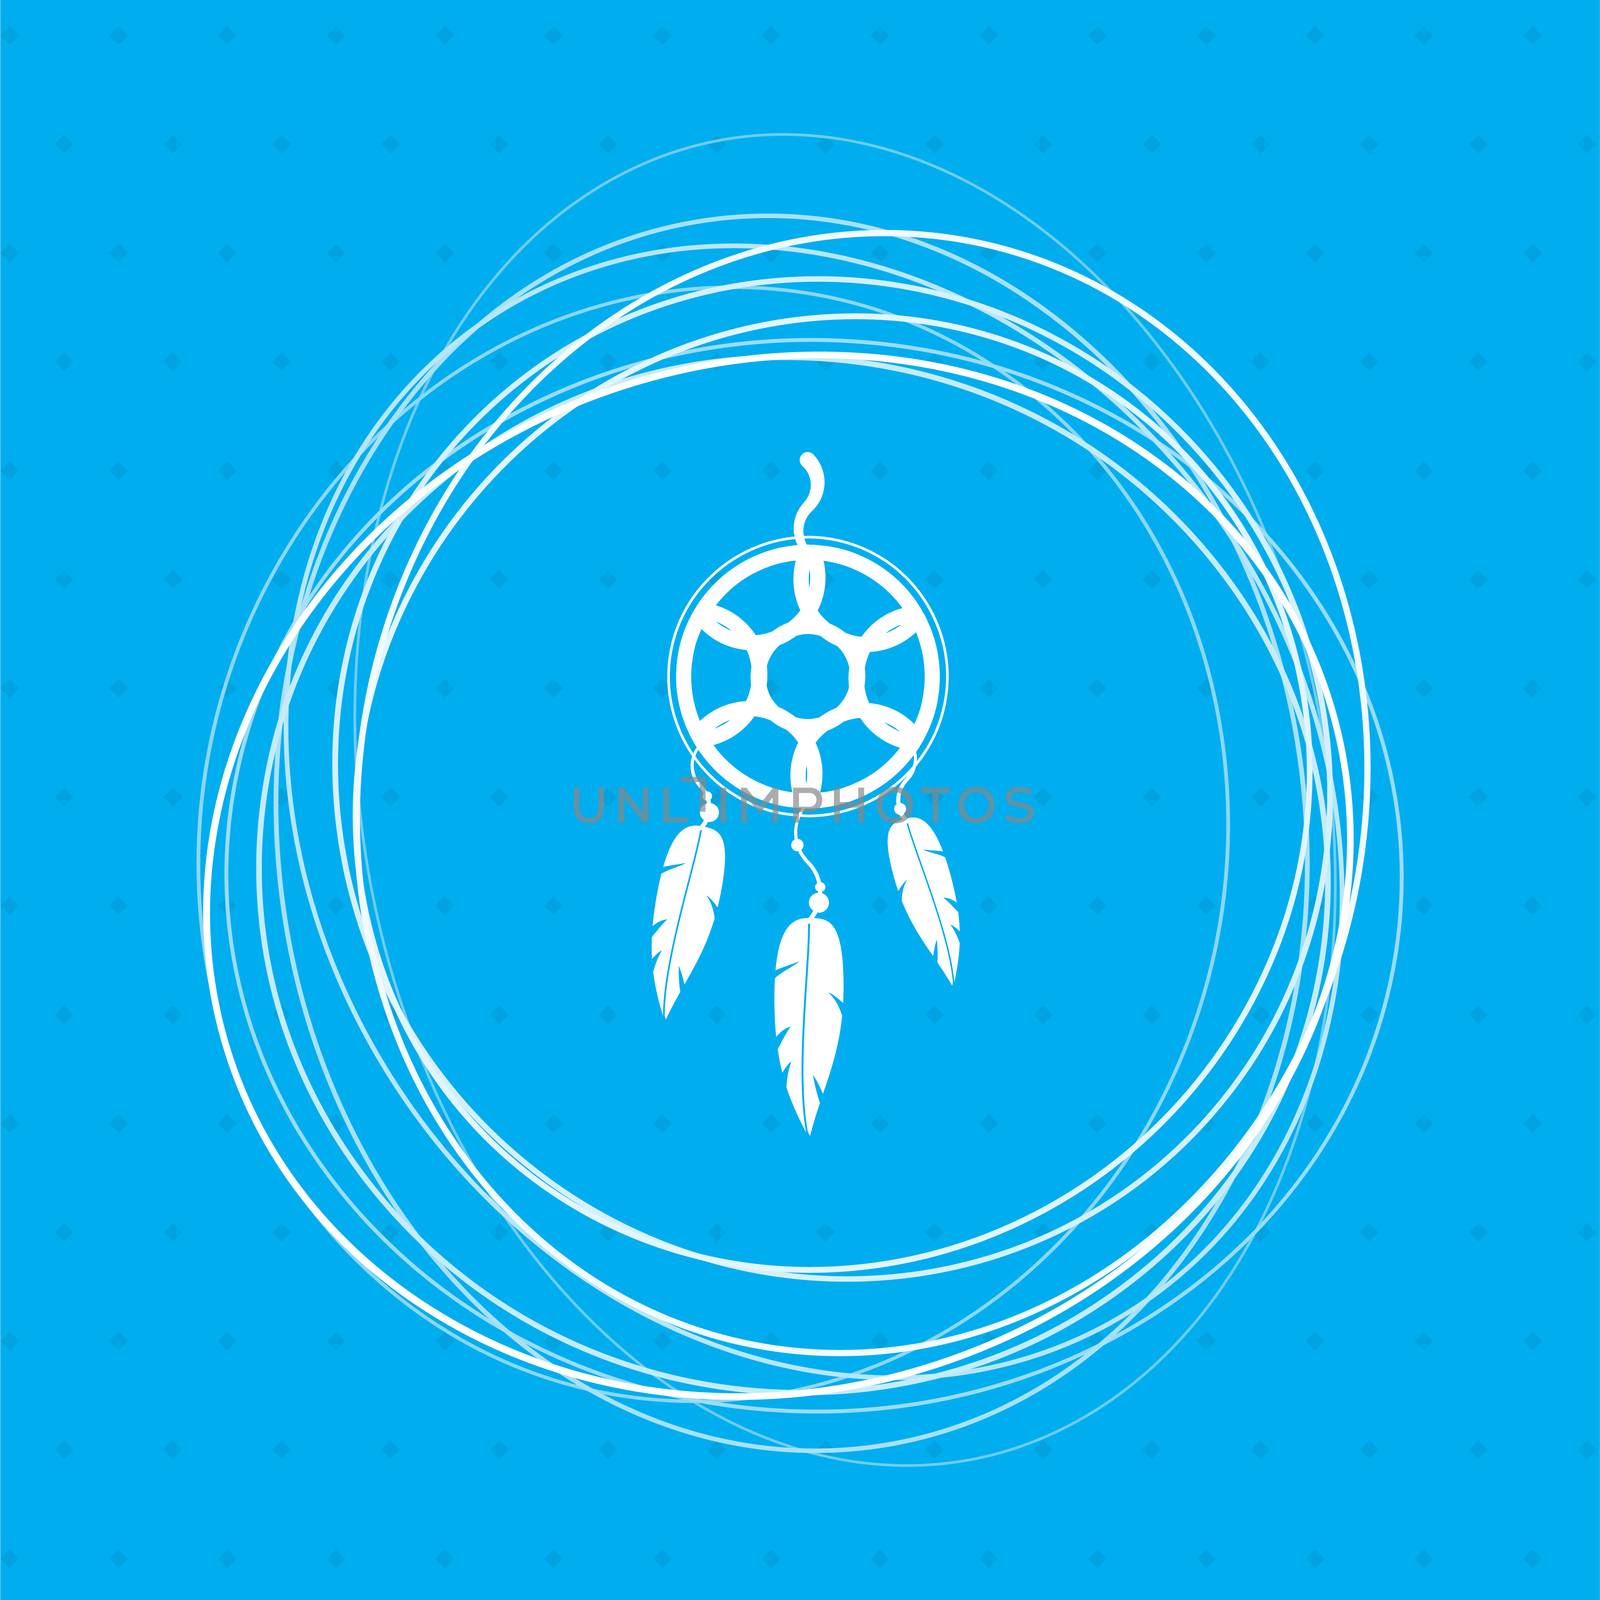 Dreamcatcher icon on a blue background with abstract circles around and place for your text. illustration